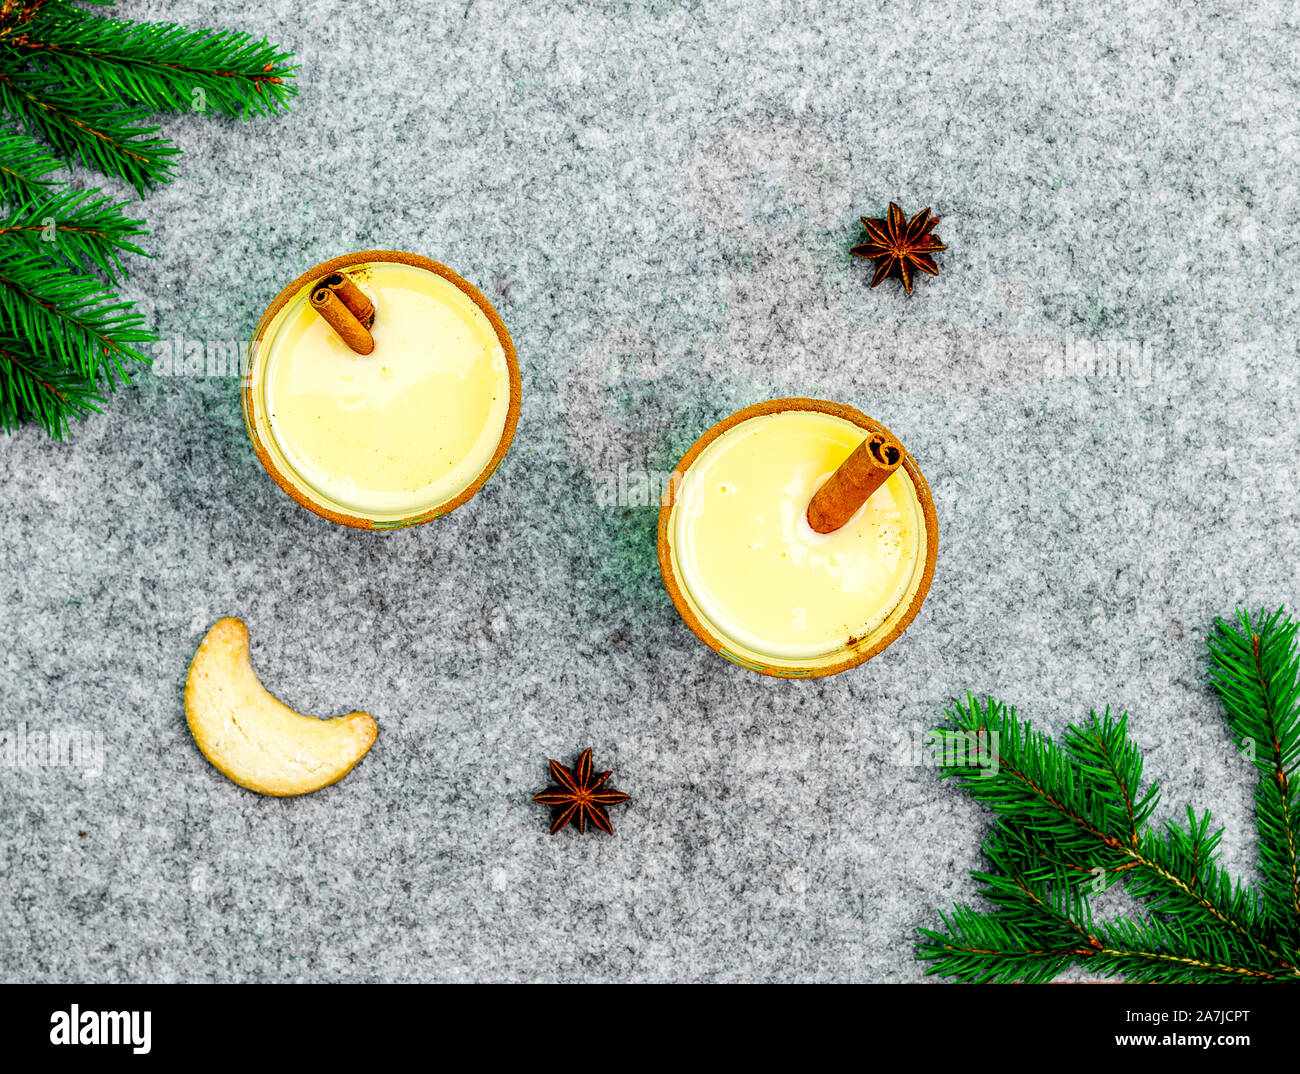 Two eggnog glasses on grey felt, top view Stock Photo